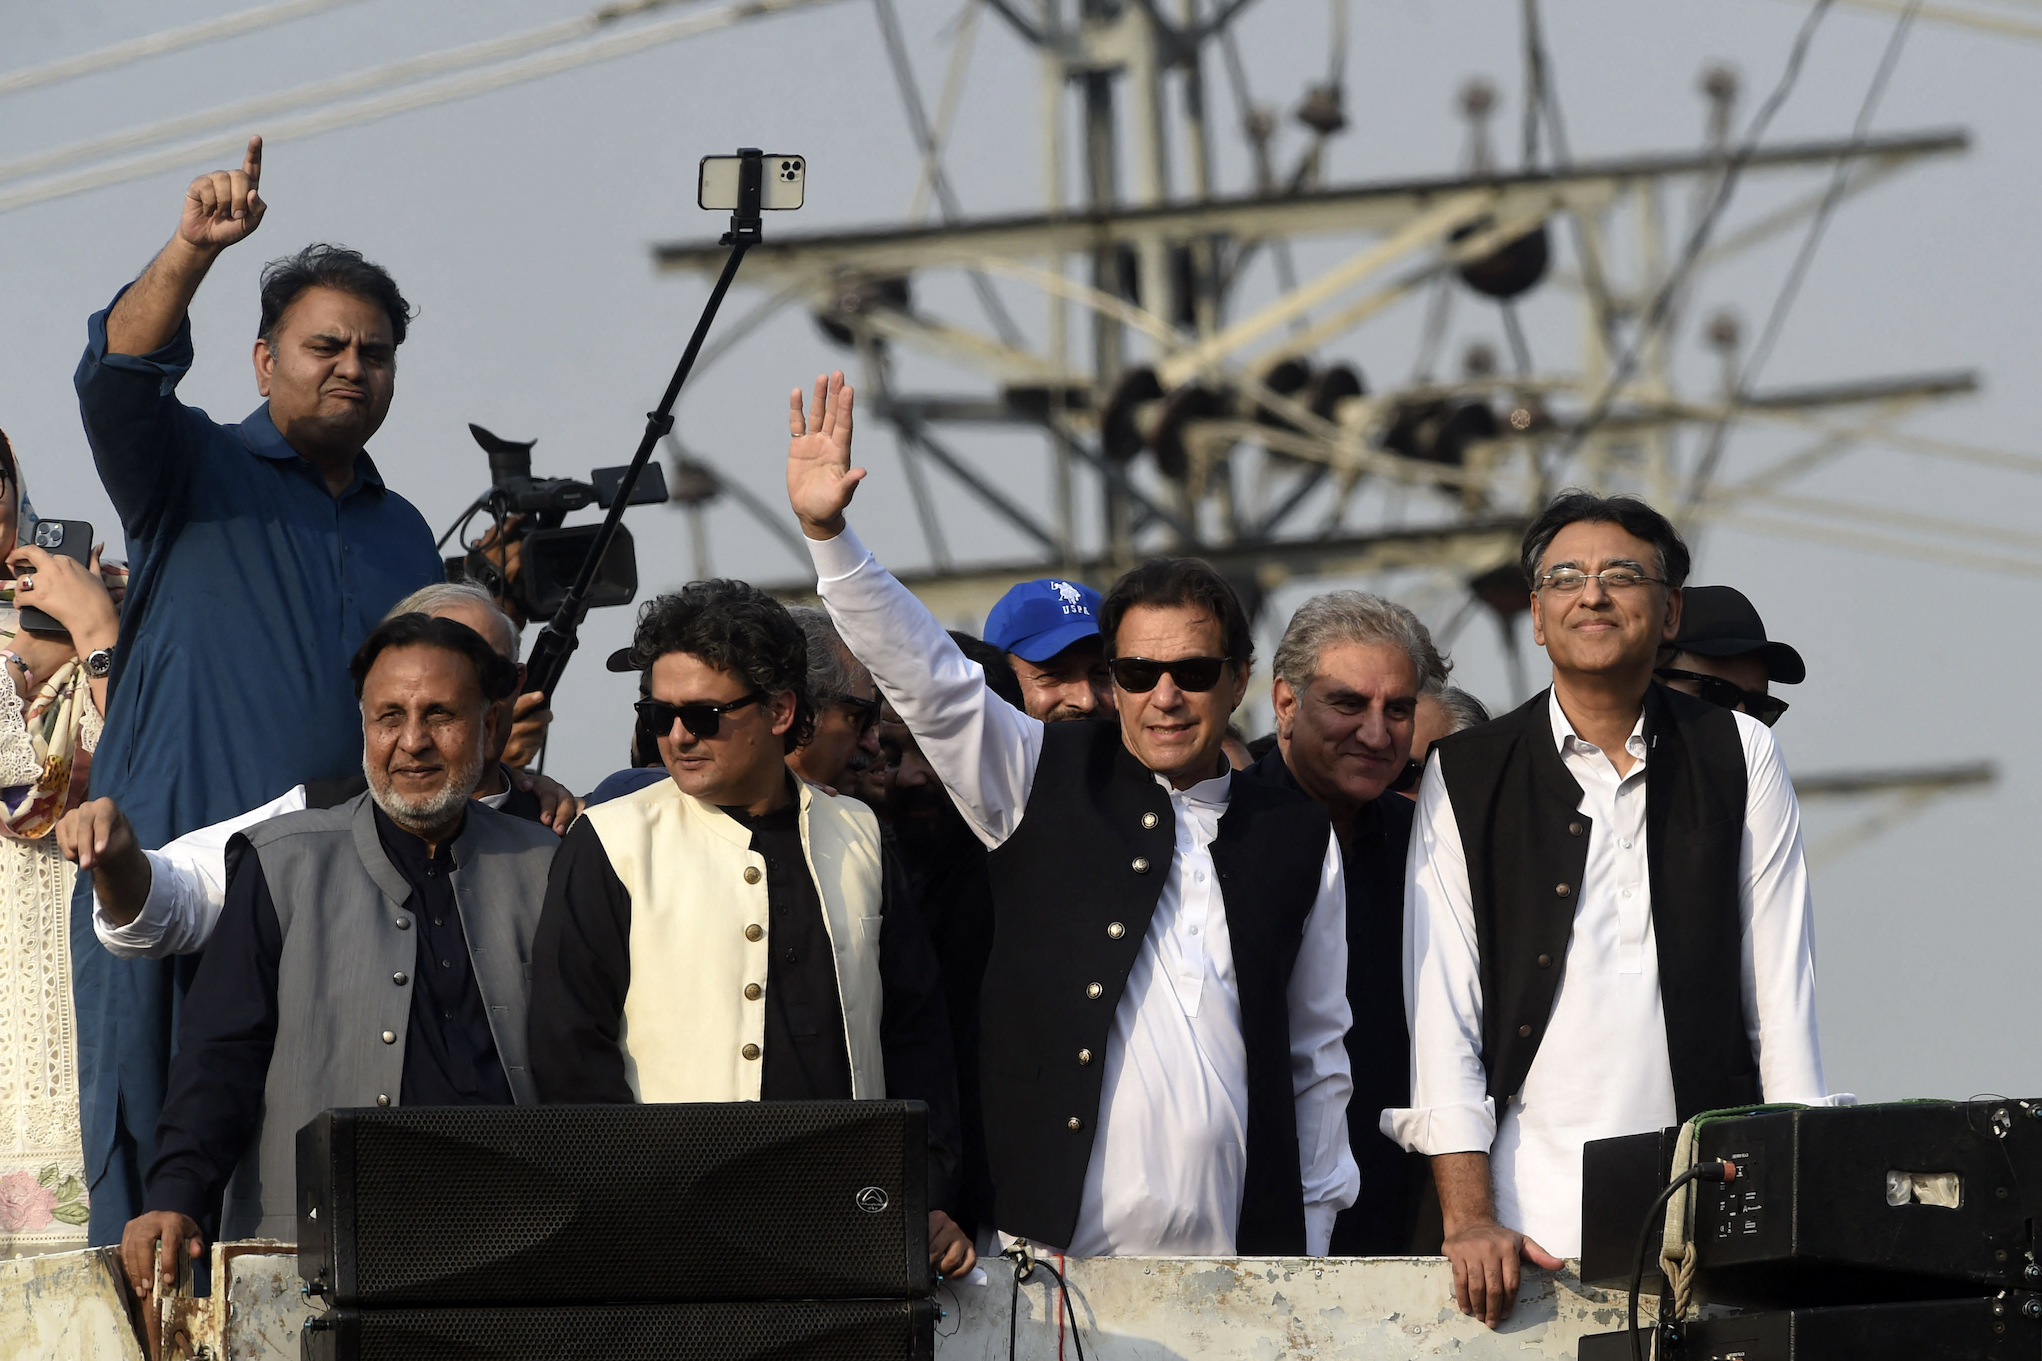 Imran Khan and supporters on 'long march' in Pakistan 